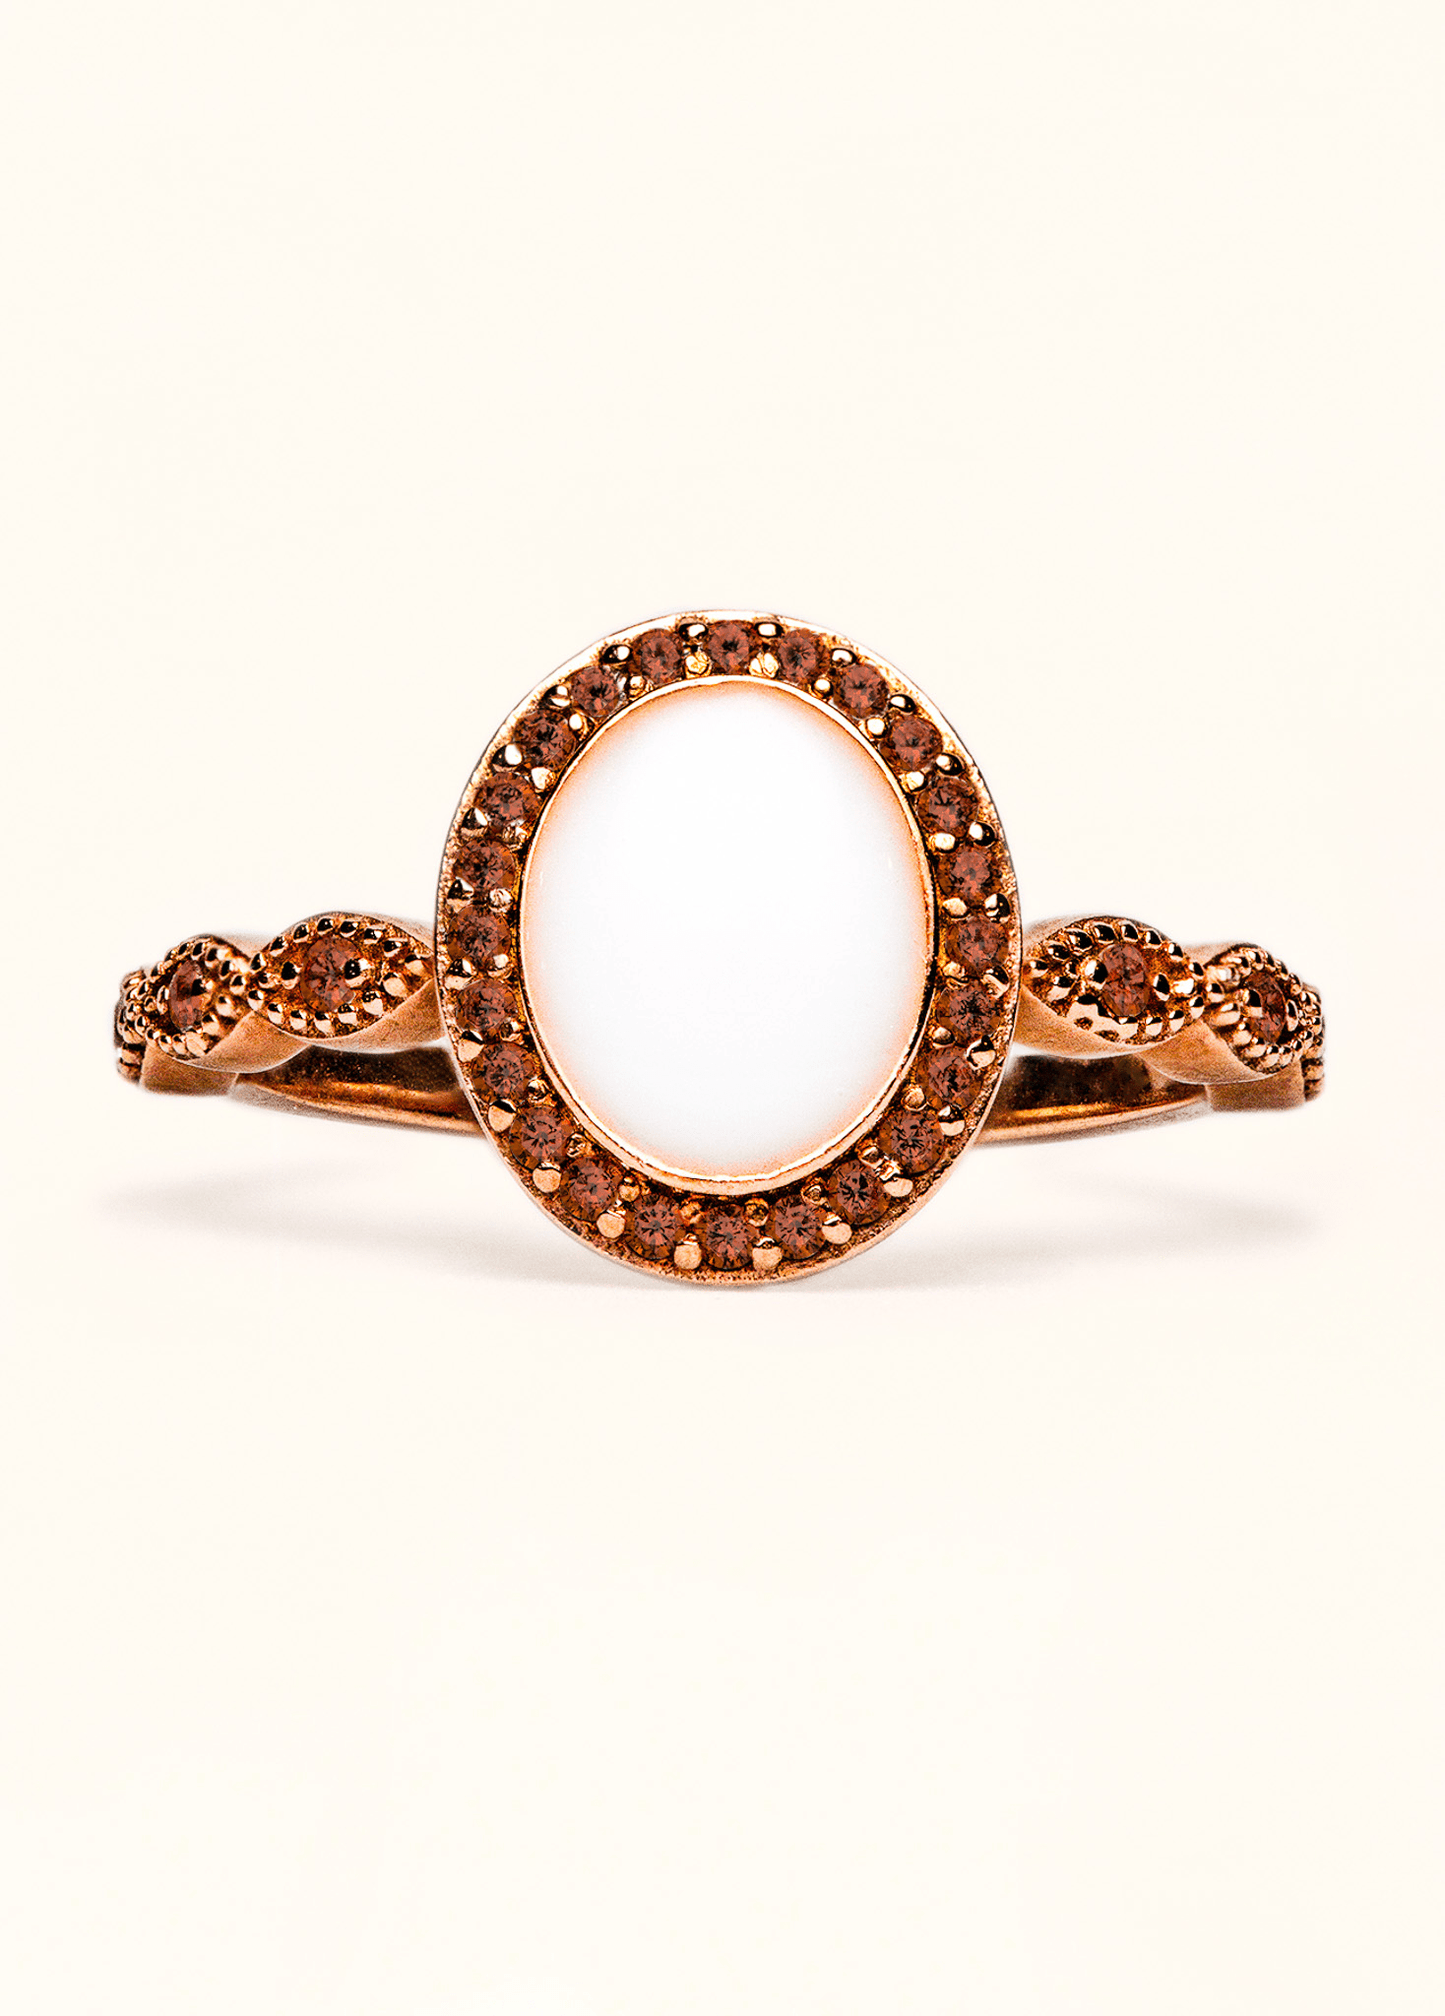 Serenity Ring with Ornate Band - Mamma's Liquid Love